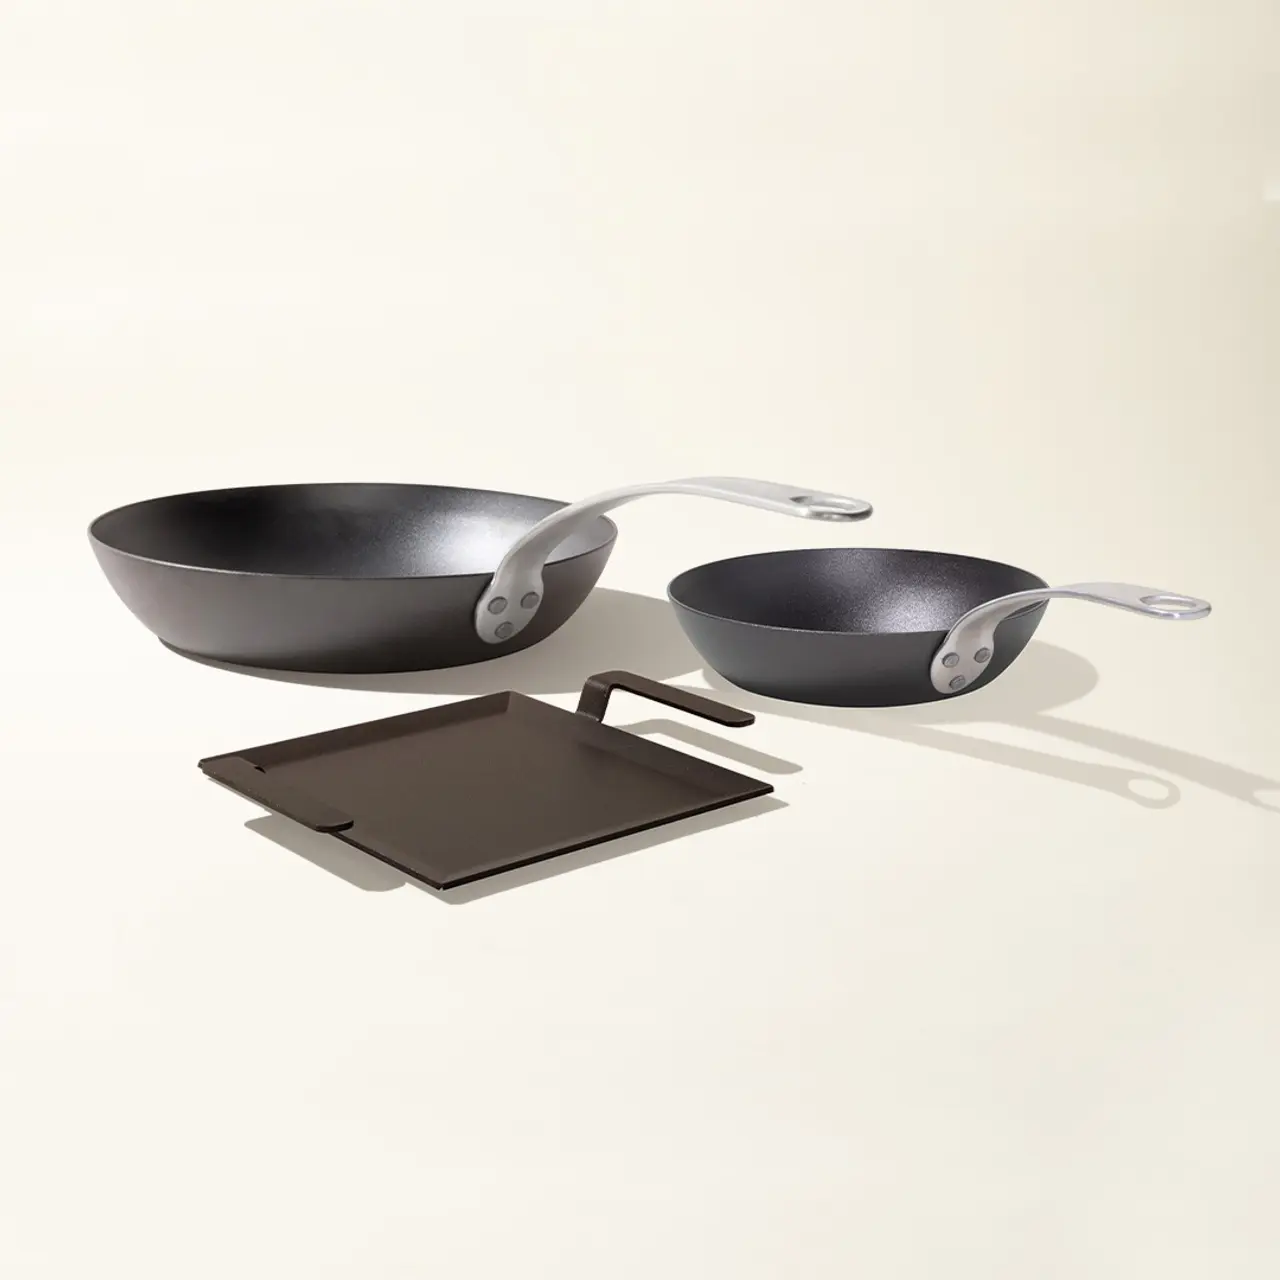 Two different-sized, black frying pans with silver handles rest on a light surface alongside a dark square trivet.